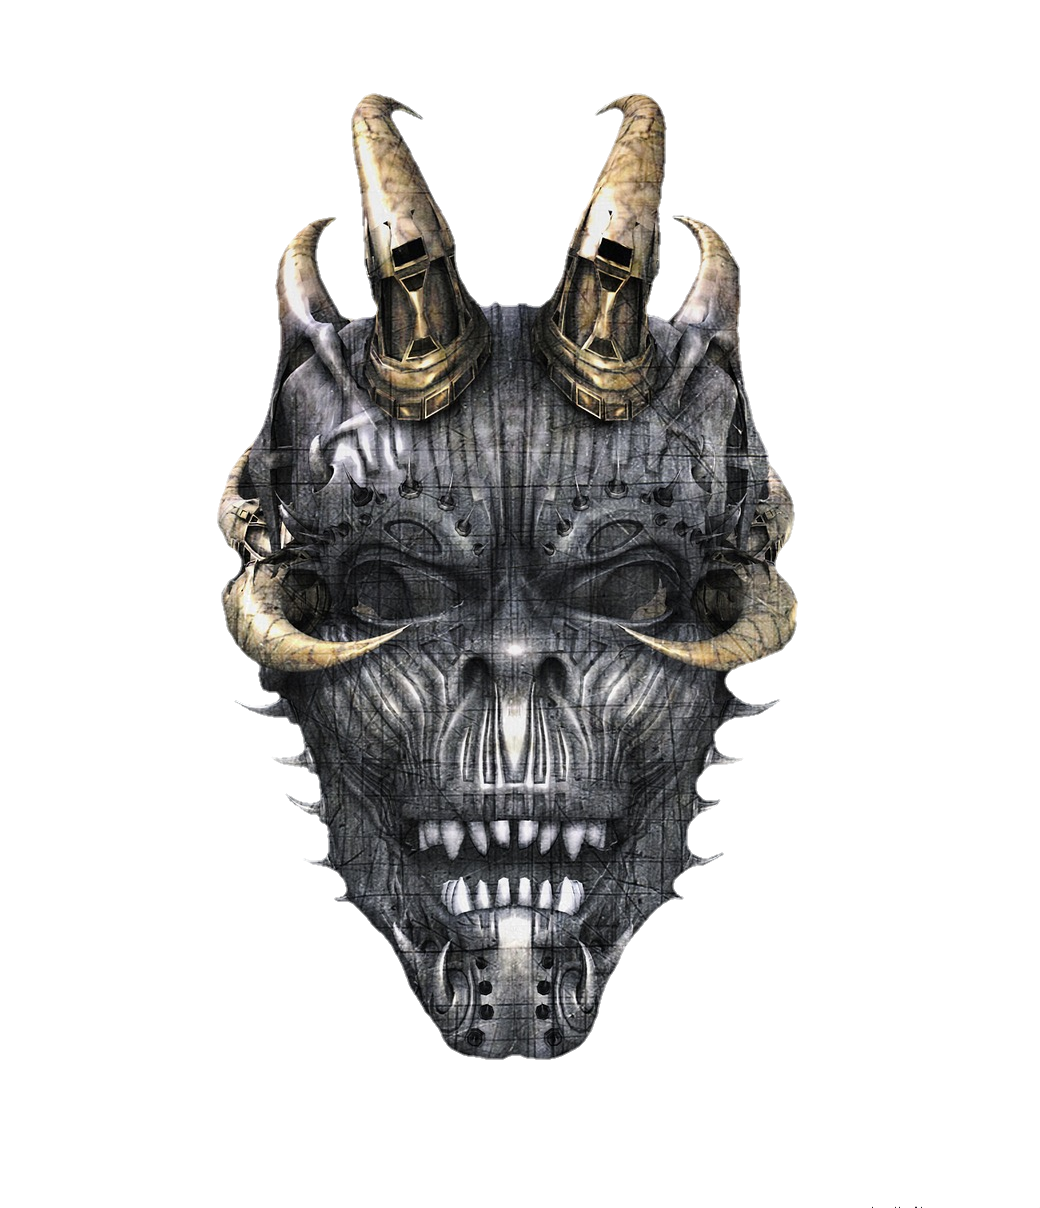 skull-png-from-pngfre-20